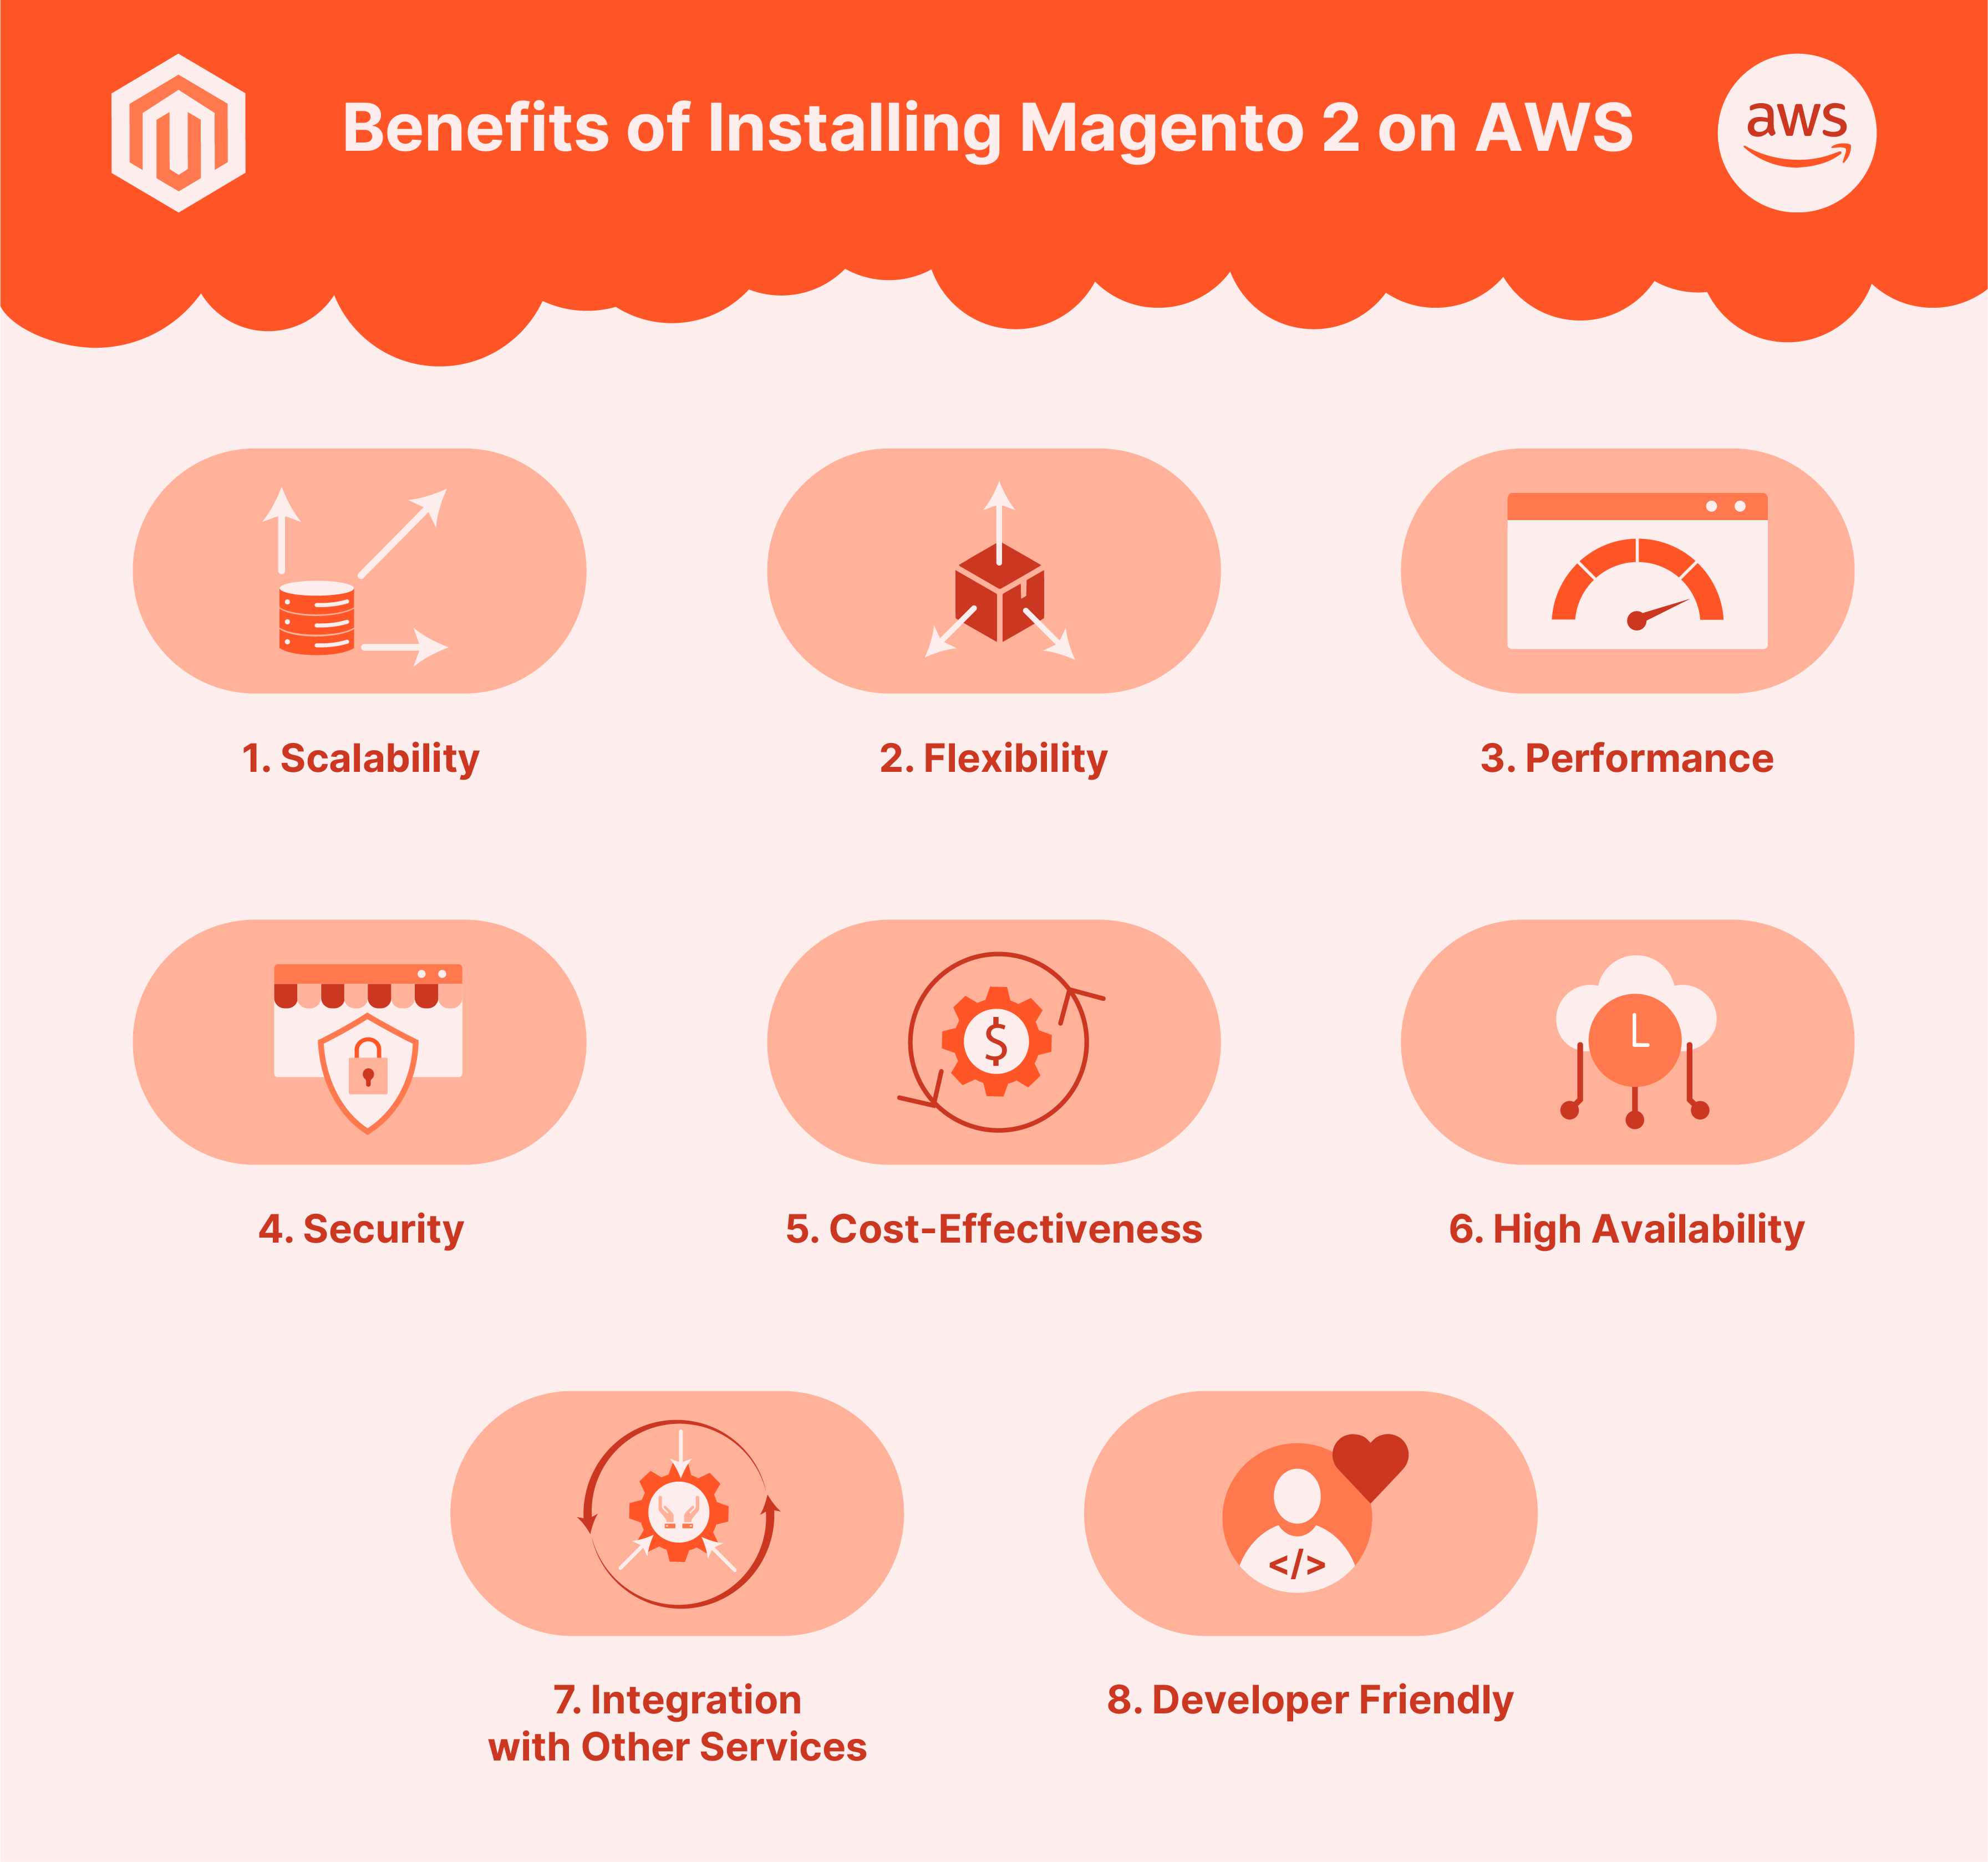 Benefits of Installing Magento 2 on AWS